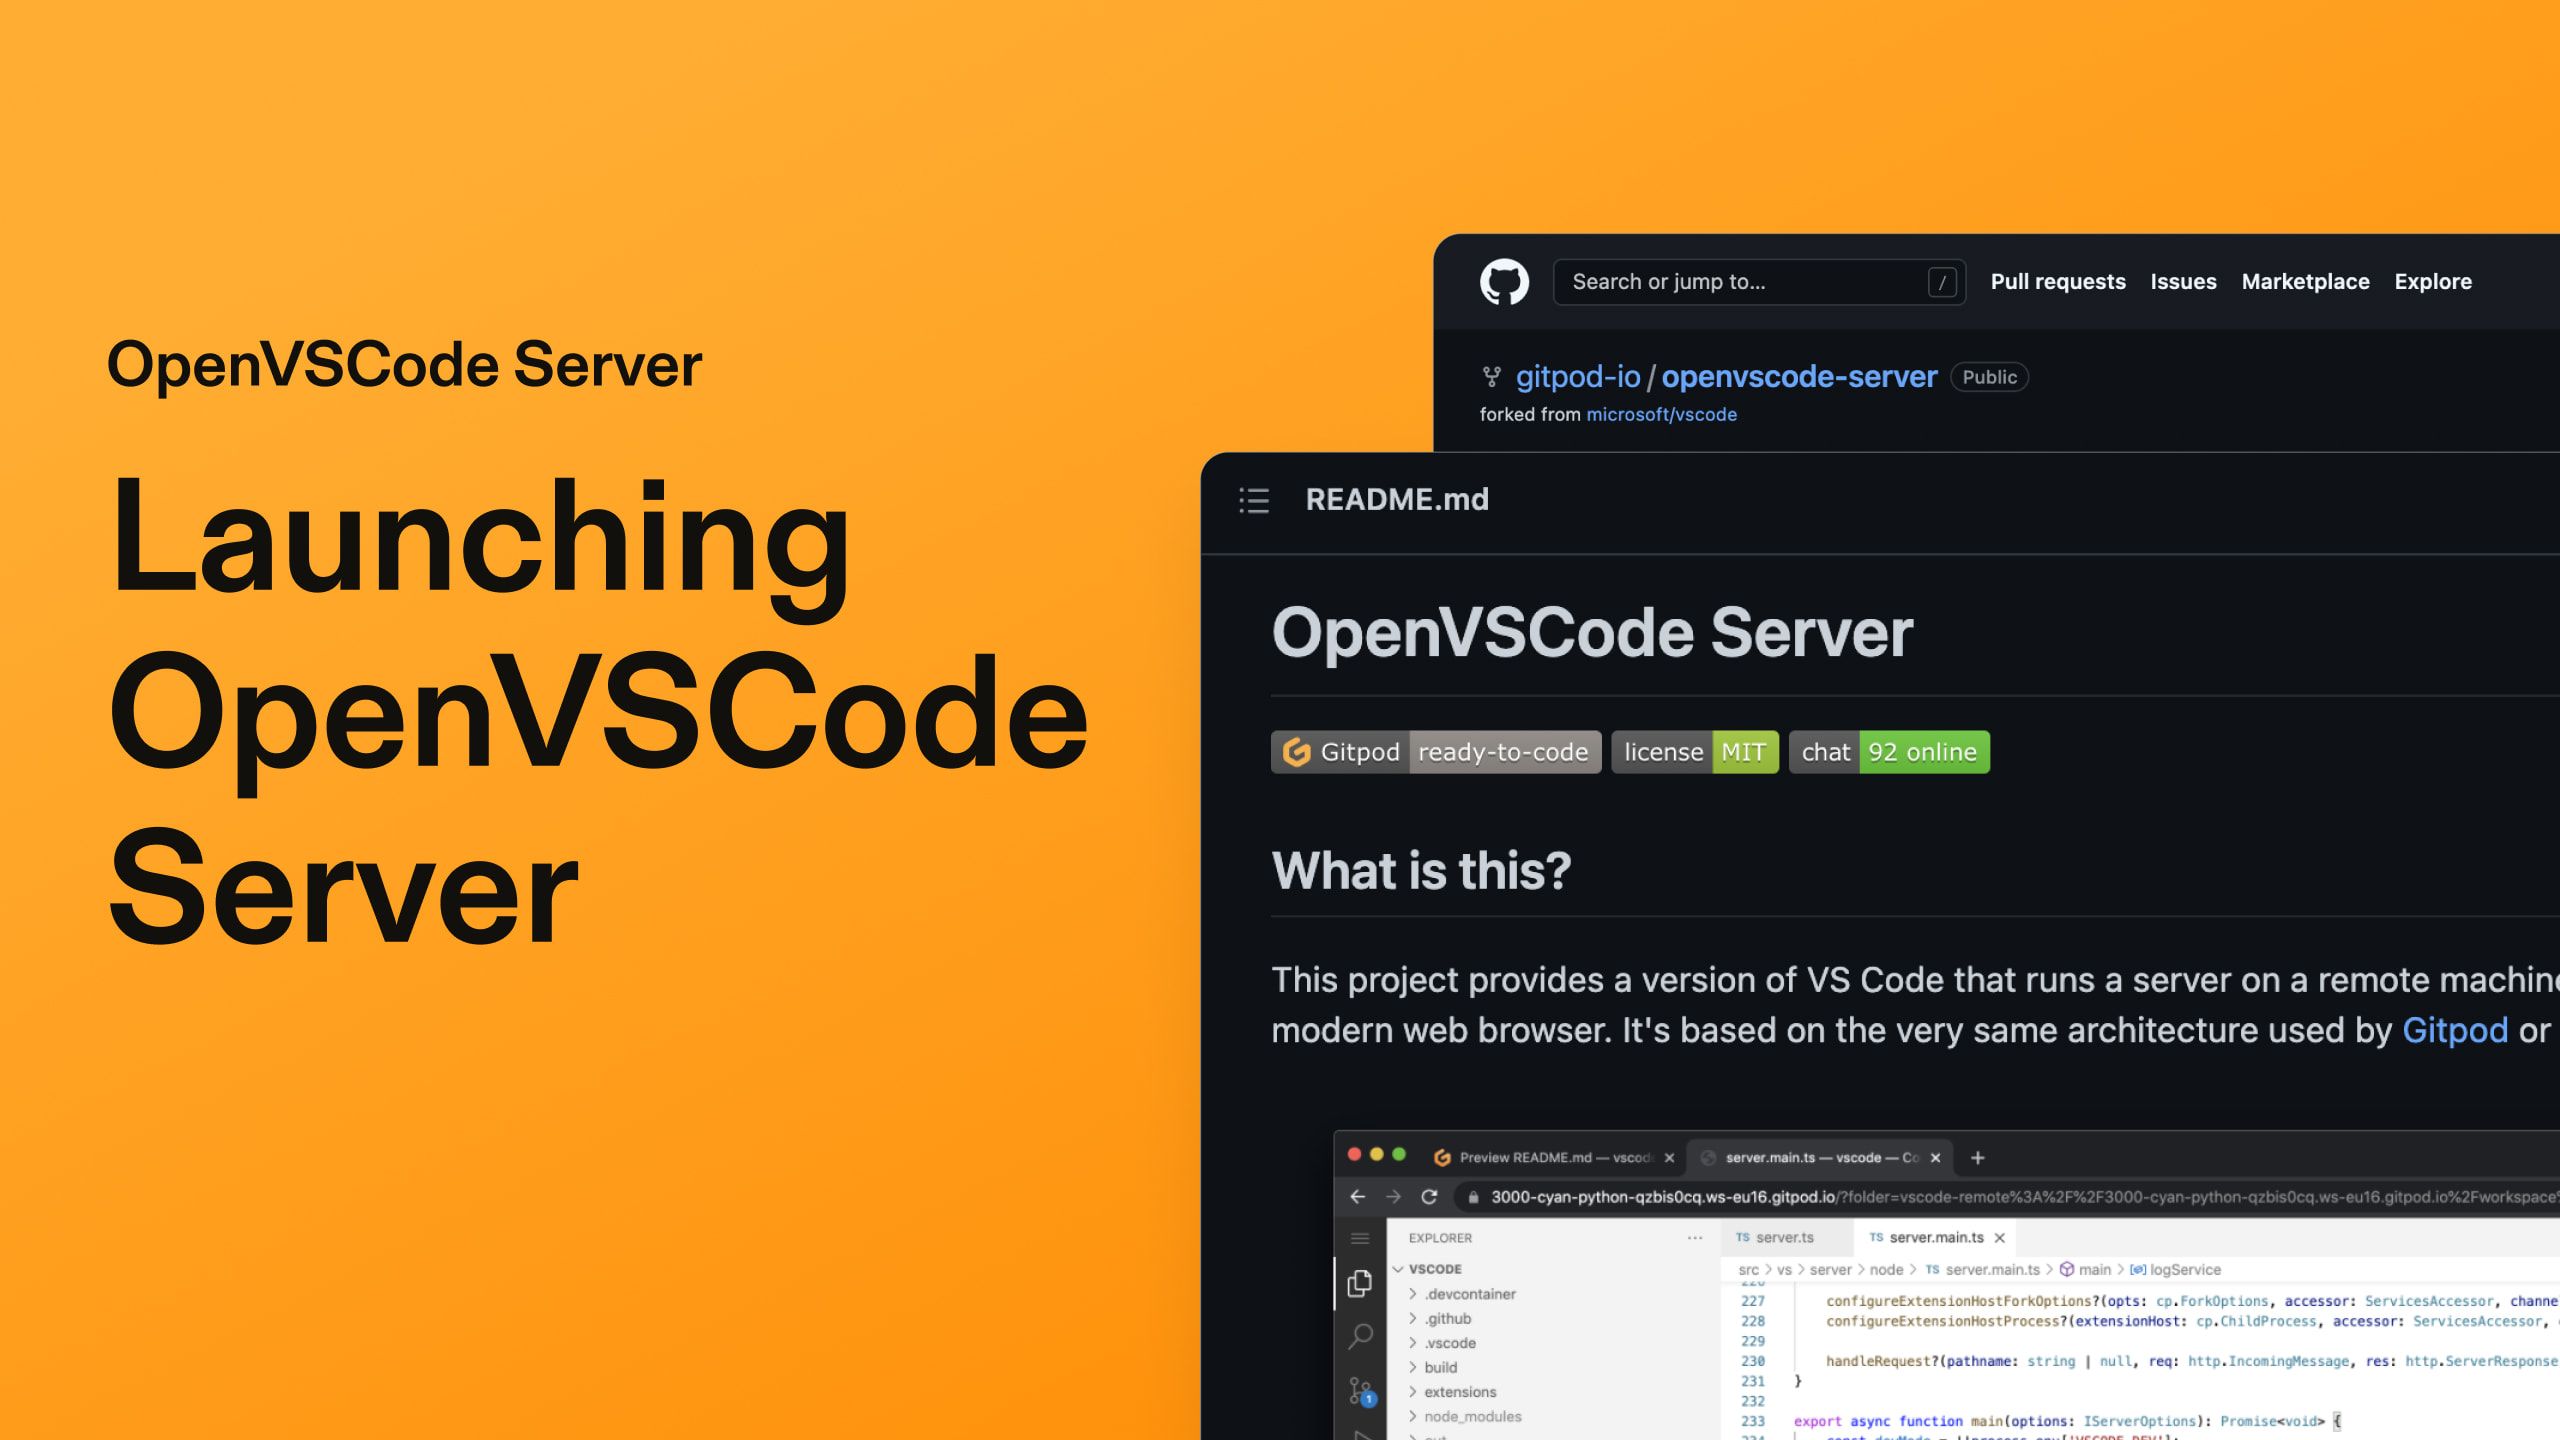 VS Code in the browser for everyone